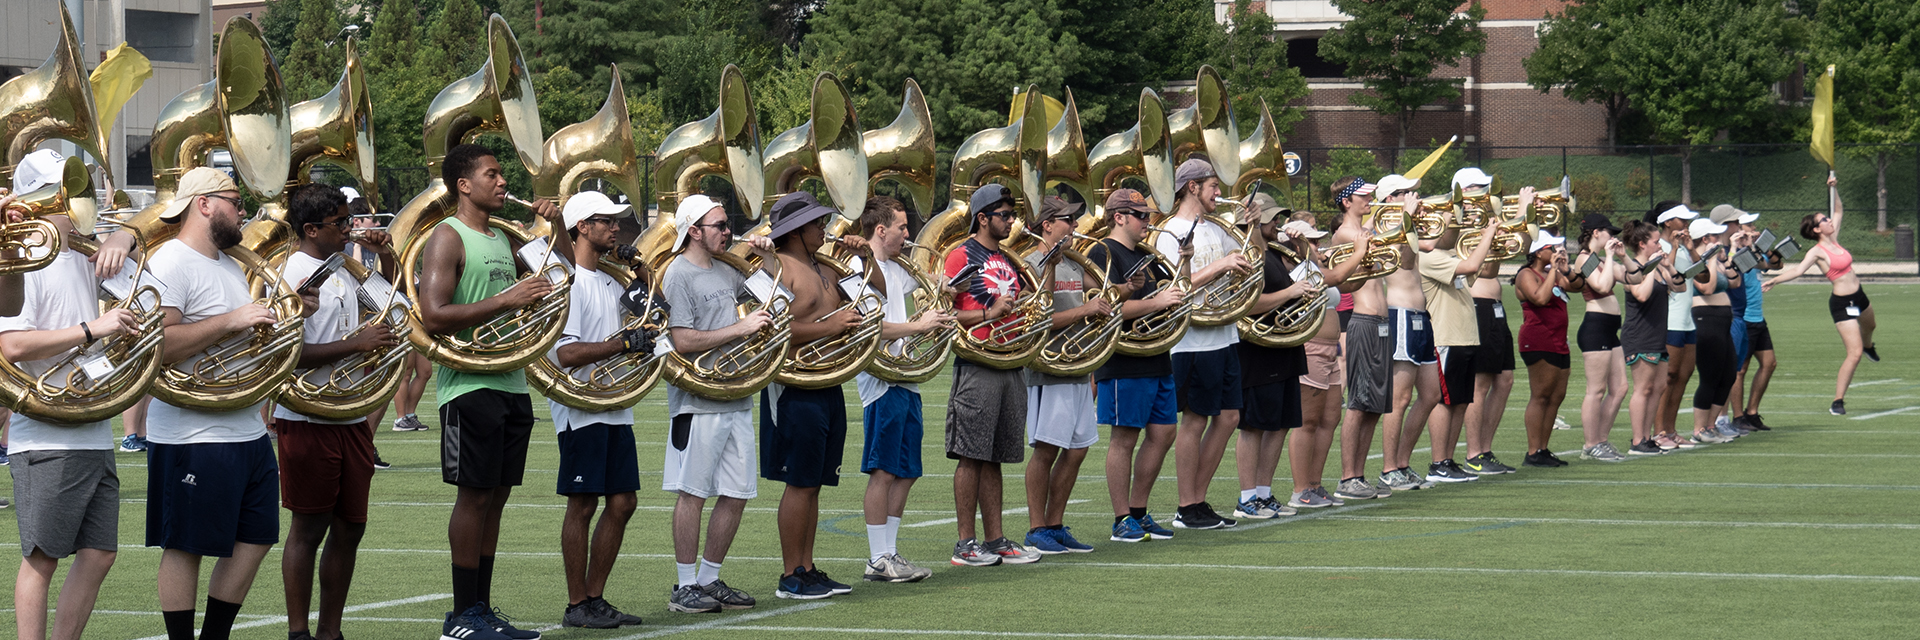 Plain clothes students practicing for a marching band performance in a field.